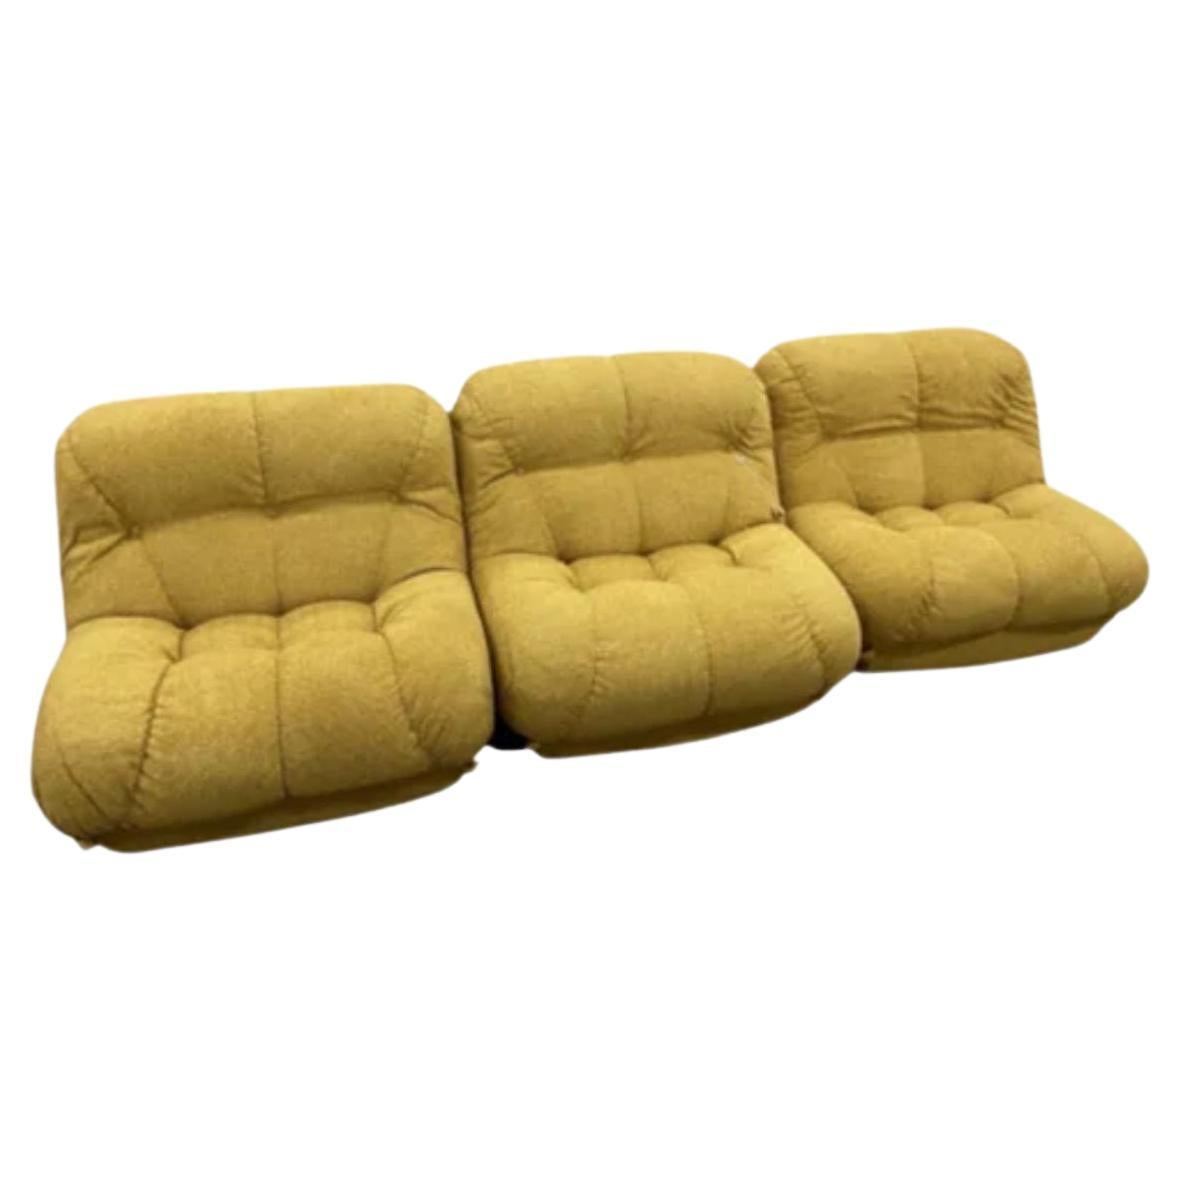 "Nuvocone" Three Piece Sectional Sofa in Yellow Fabric by Mimo Padova, 1970s For Sale